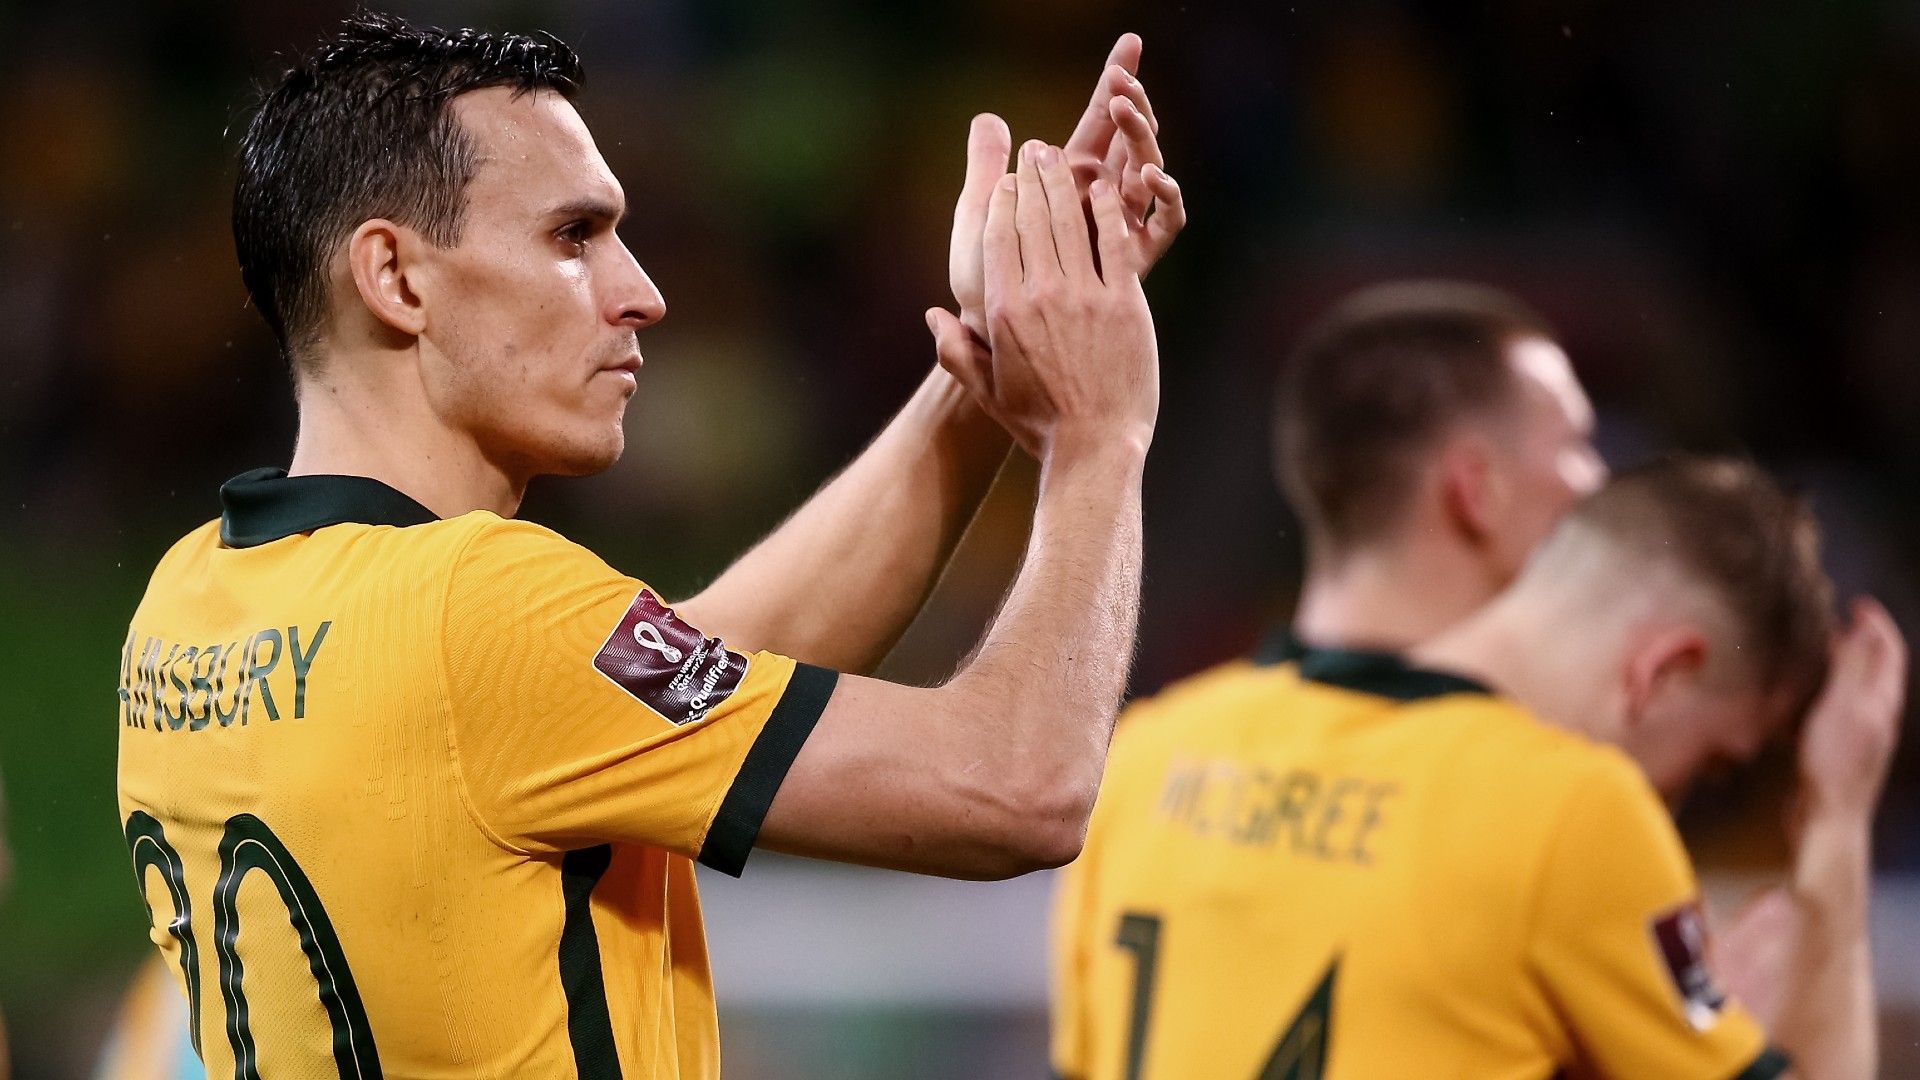 Socceroos ultimate guide: What Australia needs to do to qualify for World Cup ahead of crunch clashes